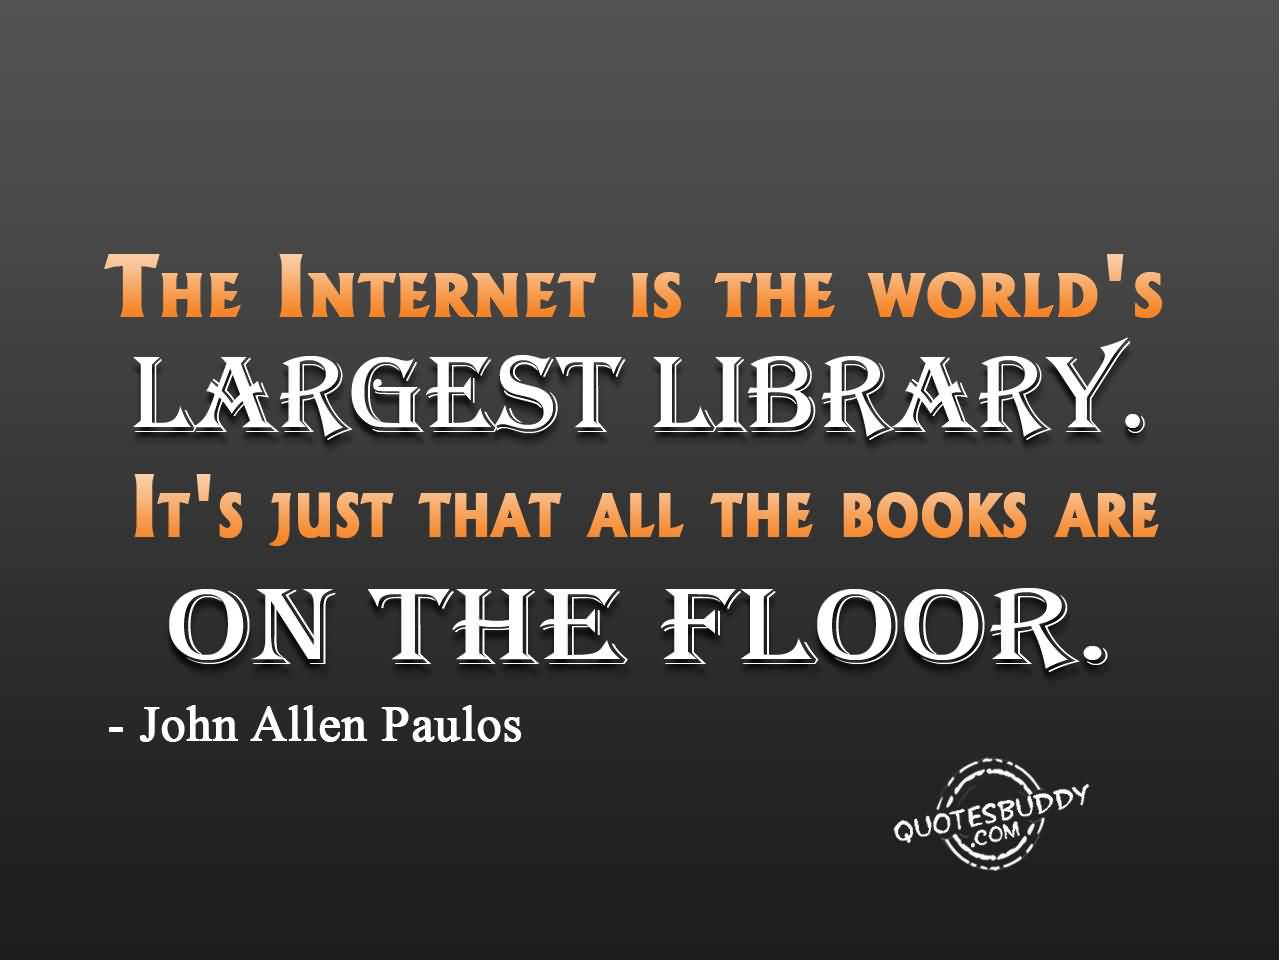 The Internet is the world's largest library. It's just that all the books are on the floor. John Allen Paulos